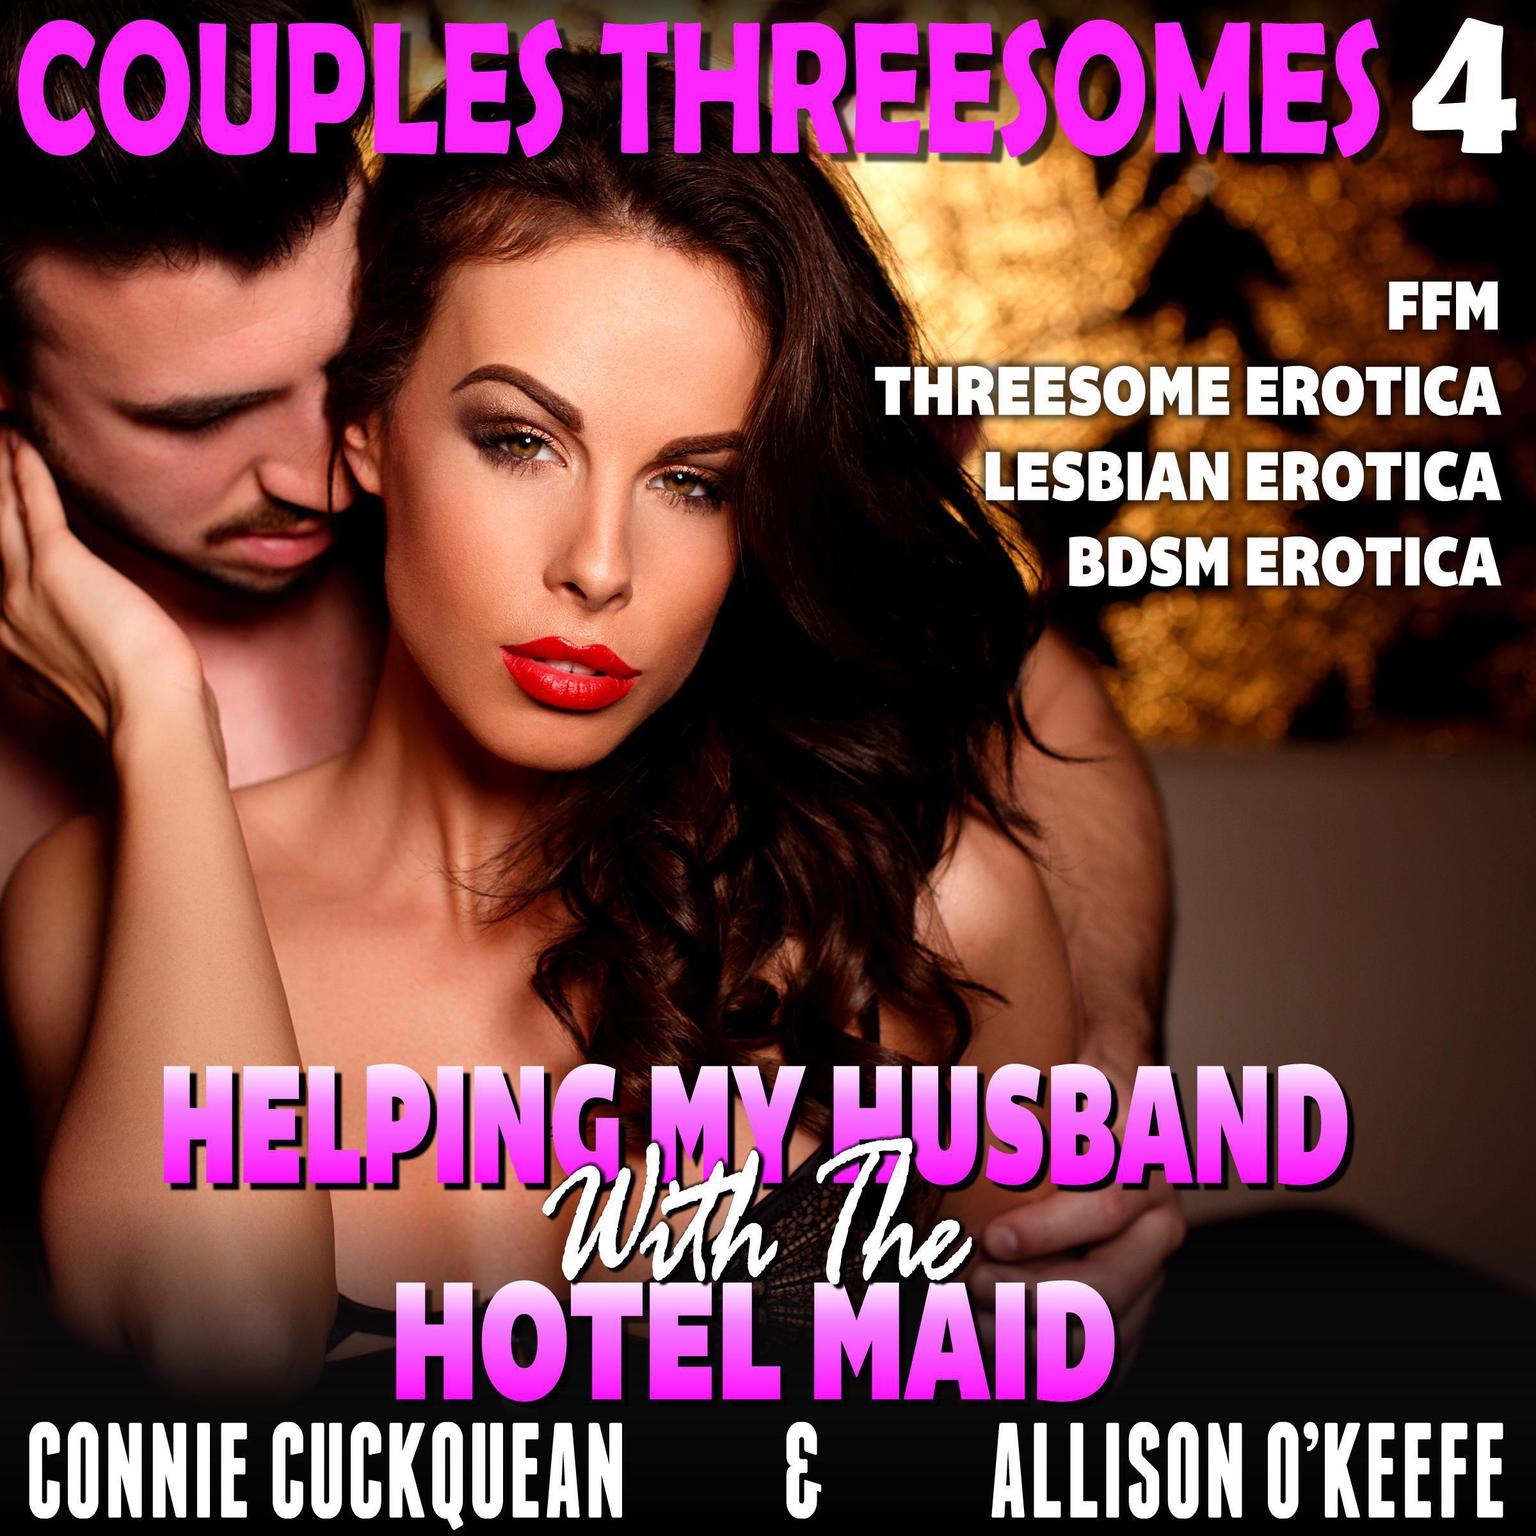 Helping My Husband With The Hotel Maid: Couples Threesomes 4 (FFM Threesome Erotica Lesbian Erotica BDSM Erotica) Audiobook, by Connie Cuckquean